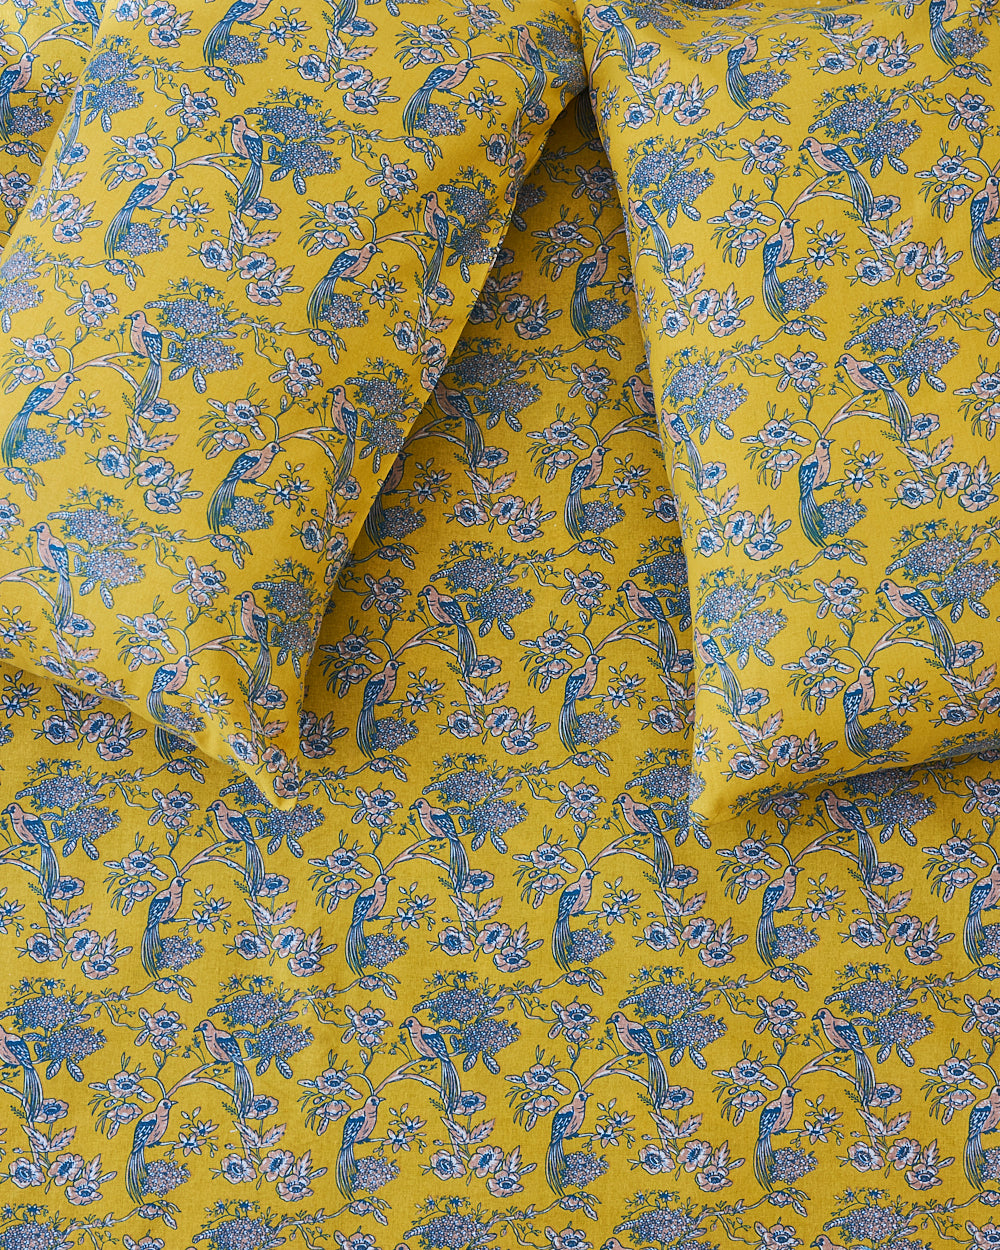 TEAL by Chumbak Persian Pottery Bedsheet, Yellow - Queen size, 104 TC